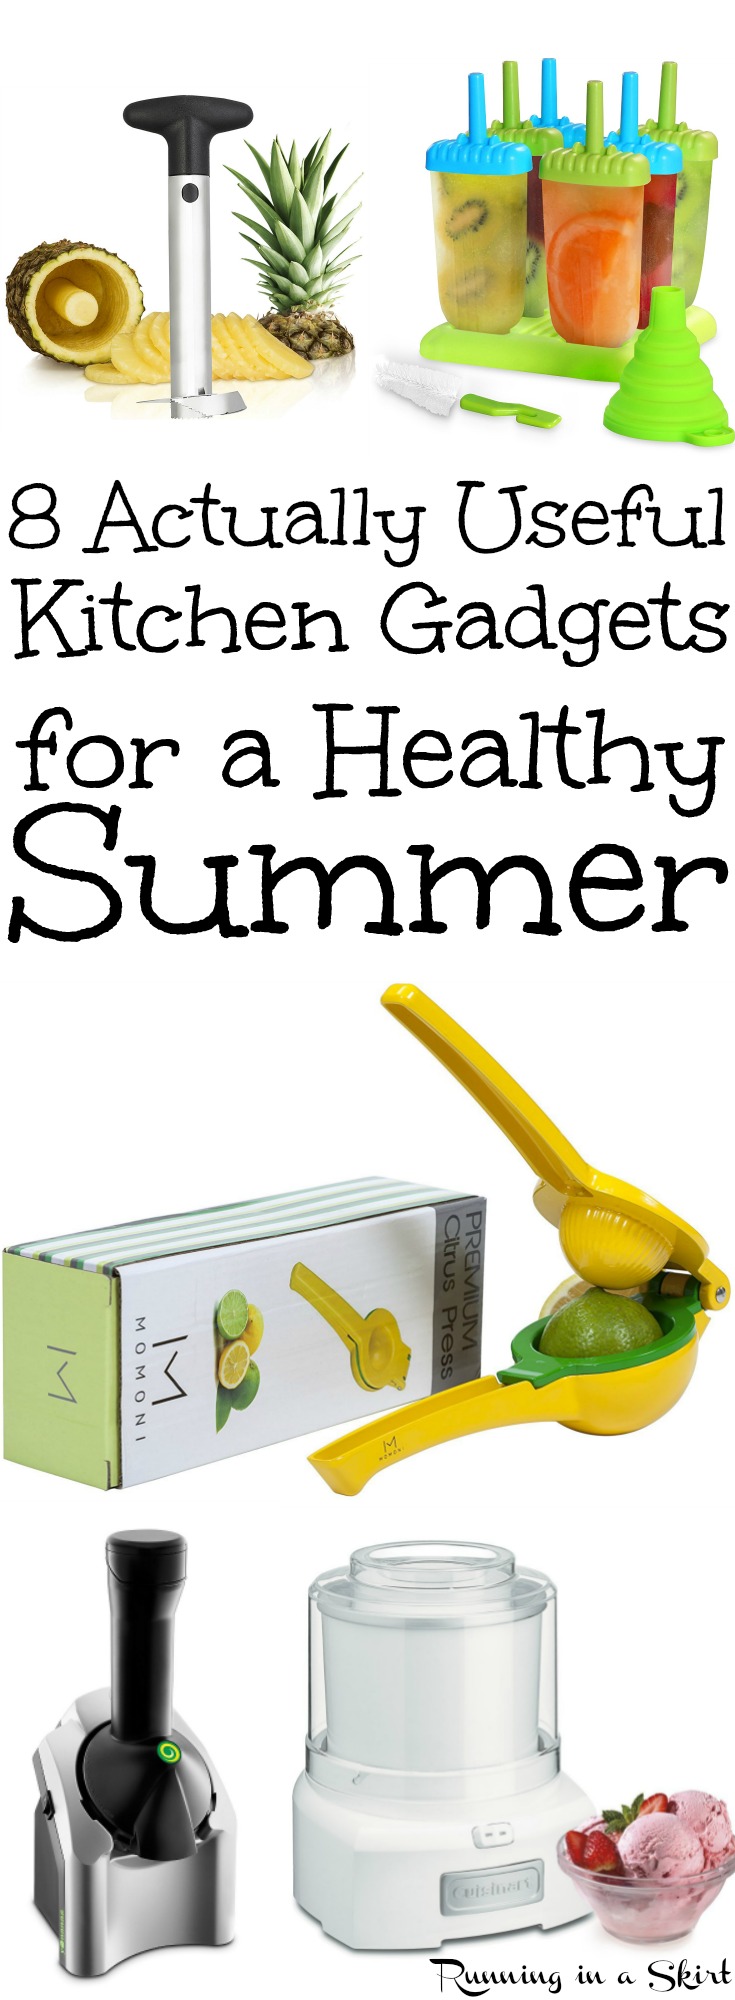 5 summer kitchen gadgets that put the fun in functional